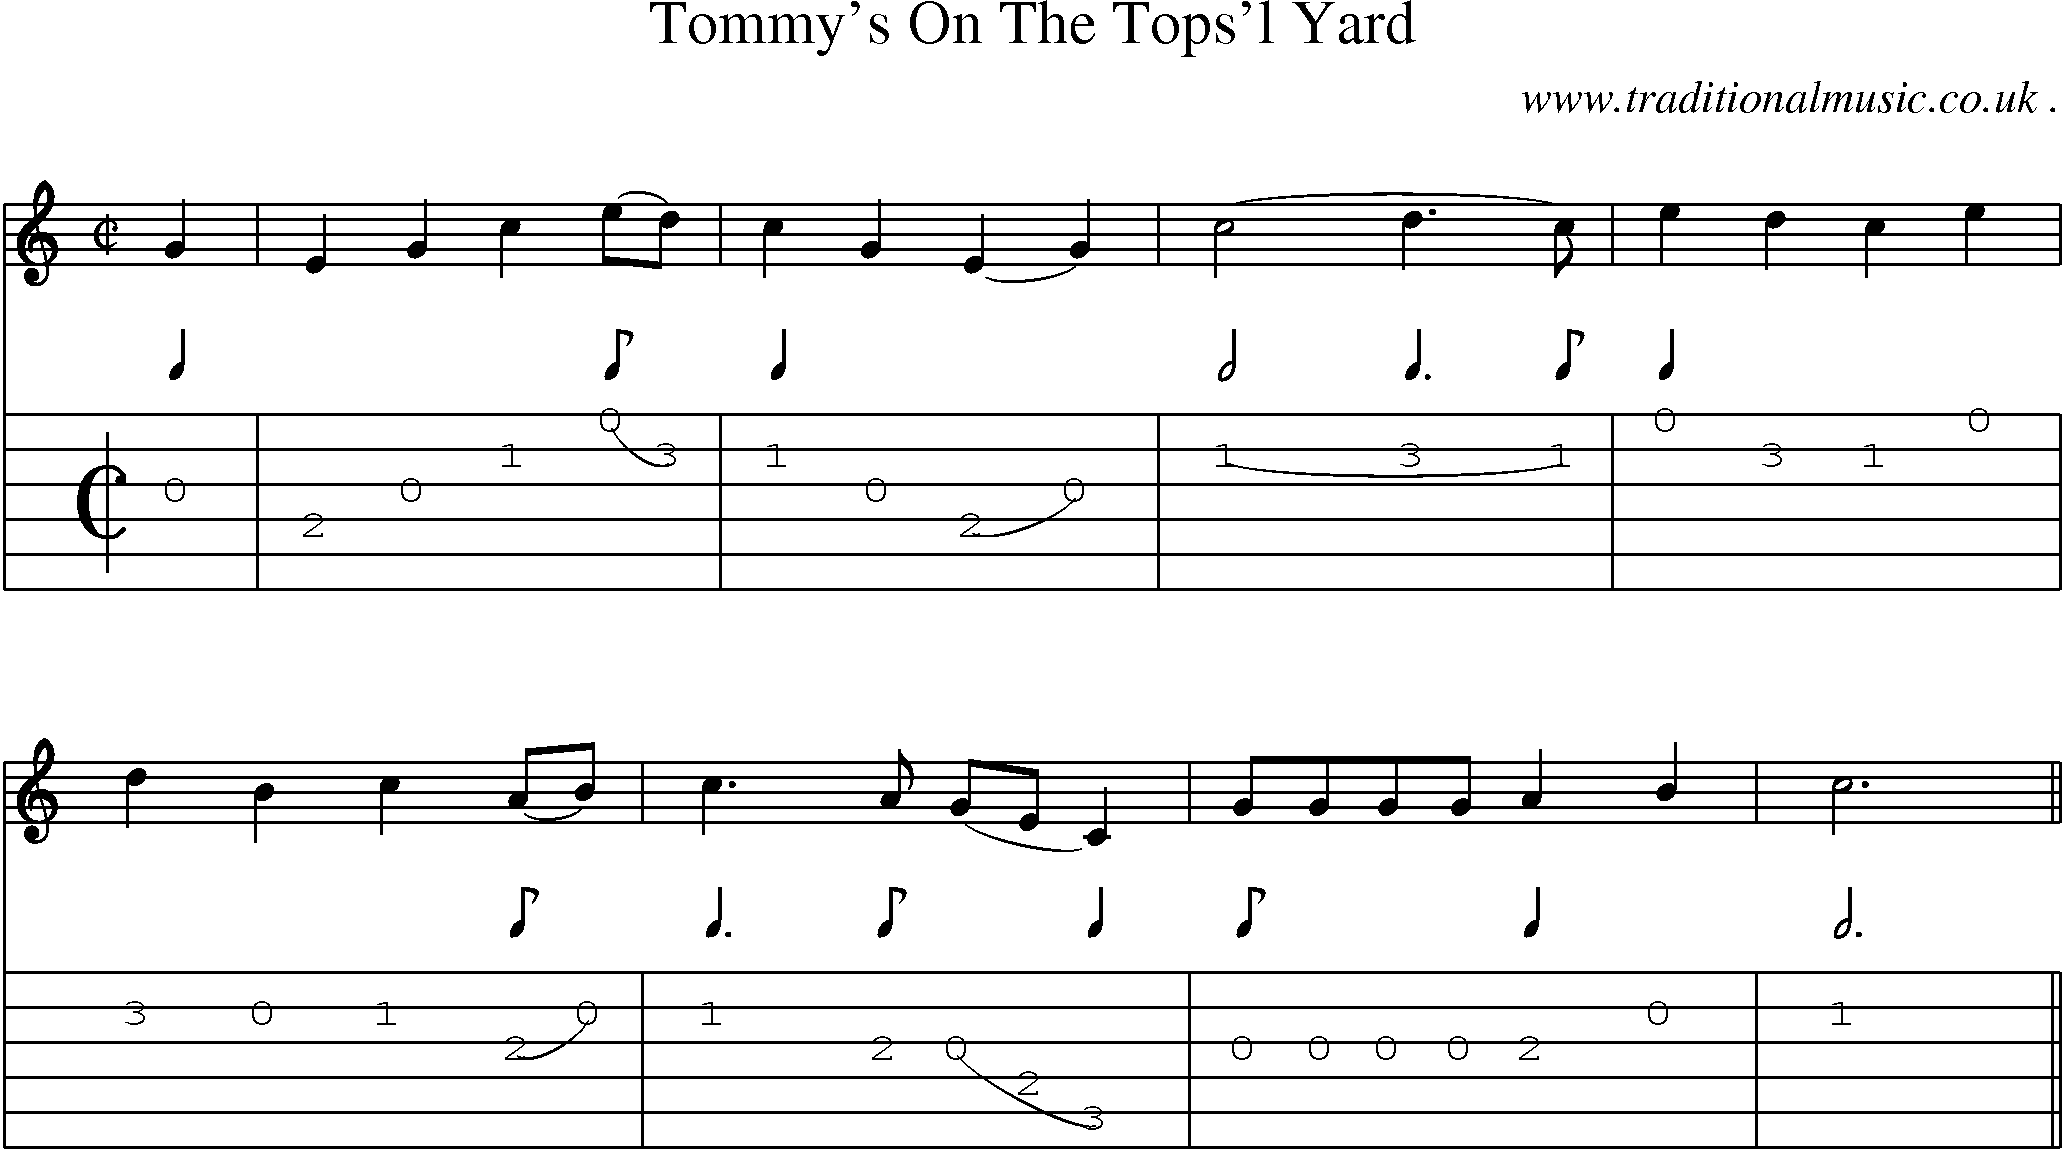 Sheet-Music and Guitar Tabs for Tommys On The Topsl Yard